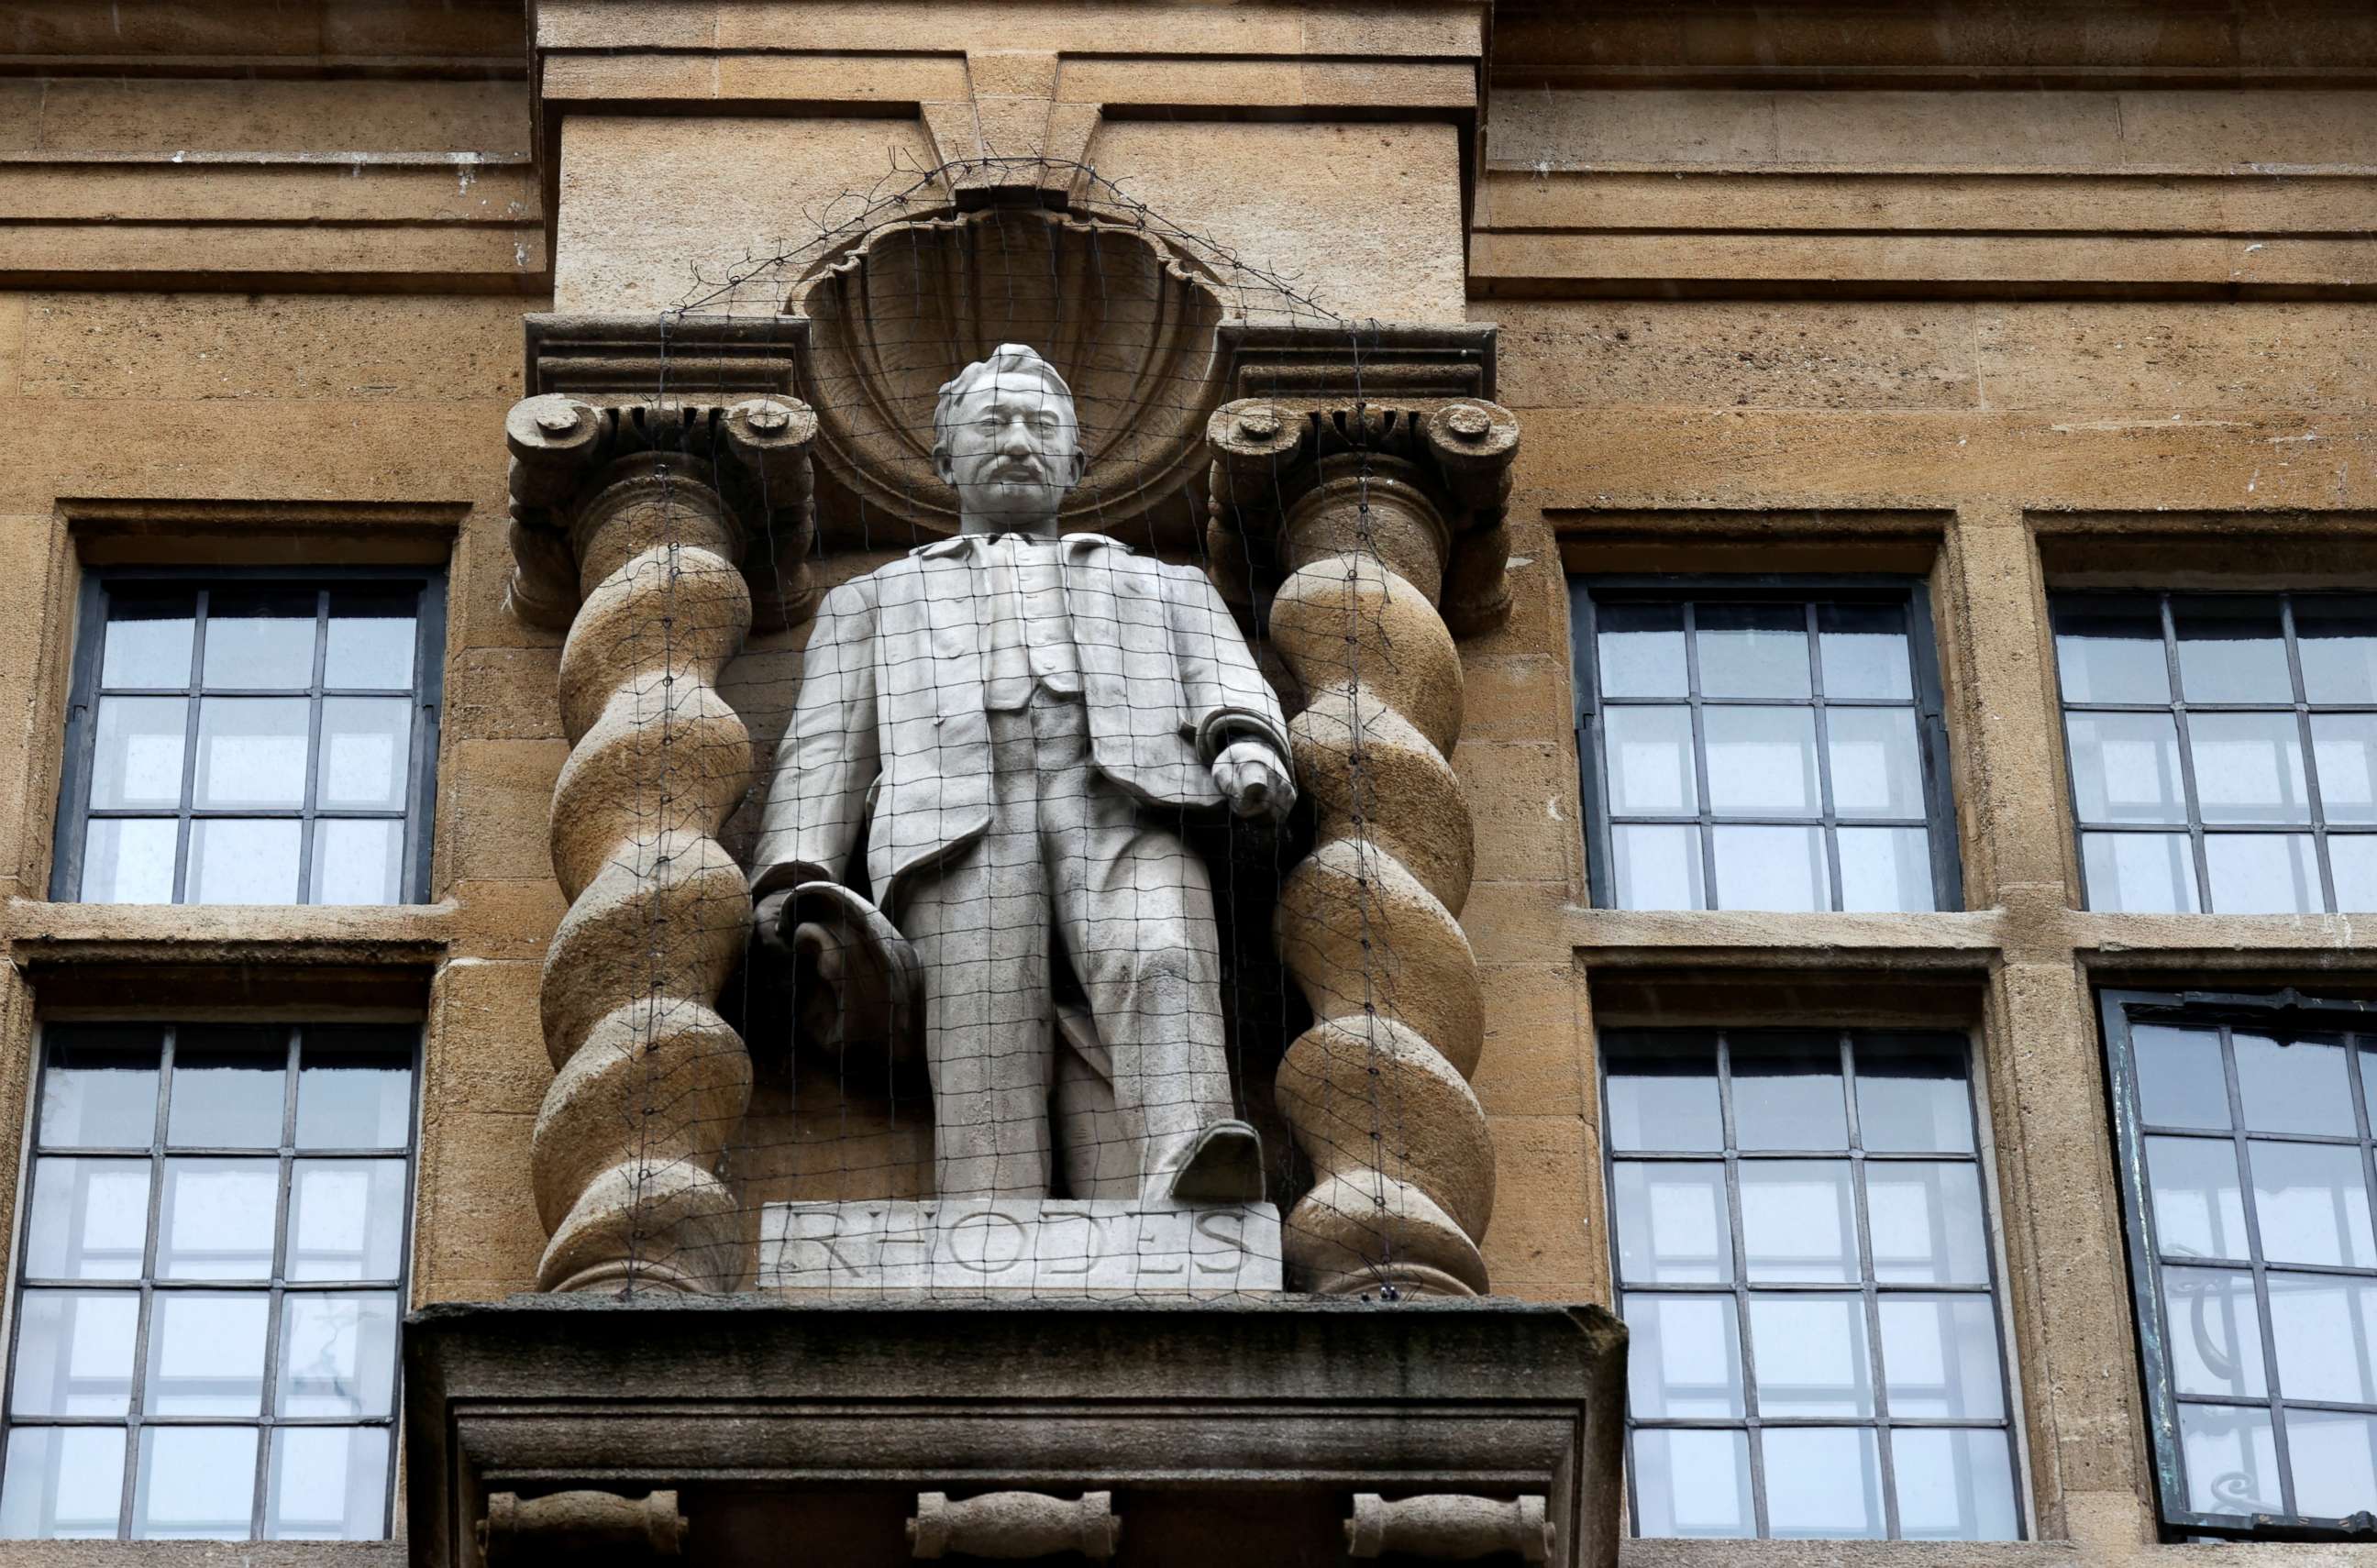 PHOTO: A statue of Cecil Rhodes, a 19th-century British colonialist, is seen outside the University of Oxford's Oriel College in Oxford, England, on June 18, 2020.